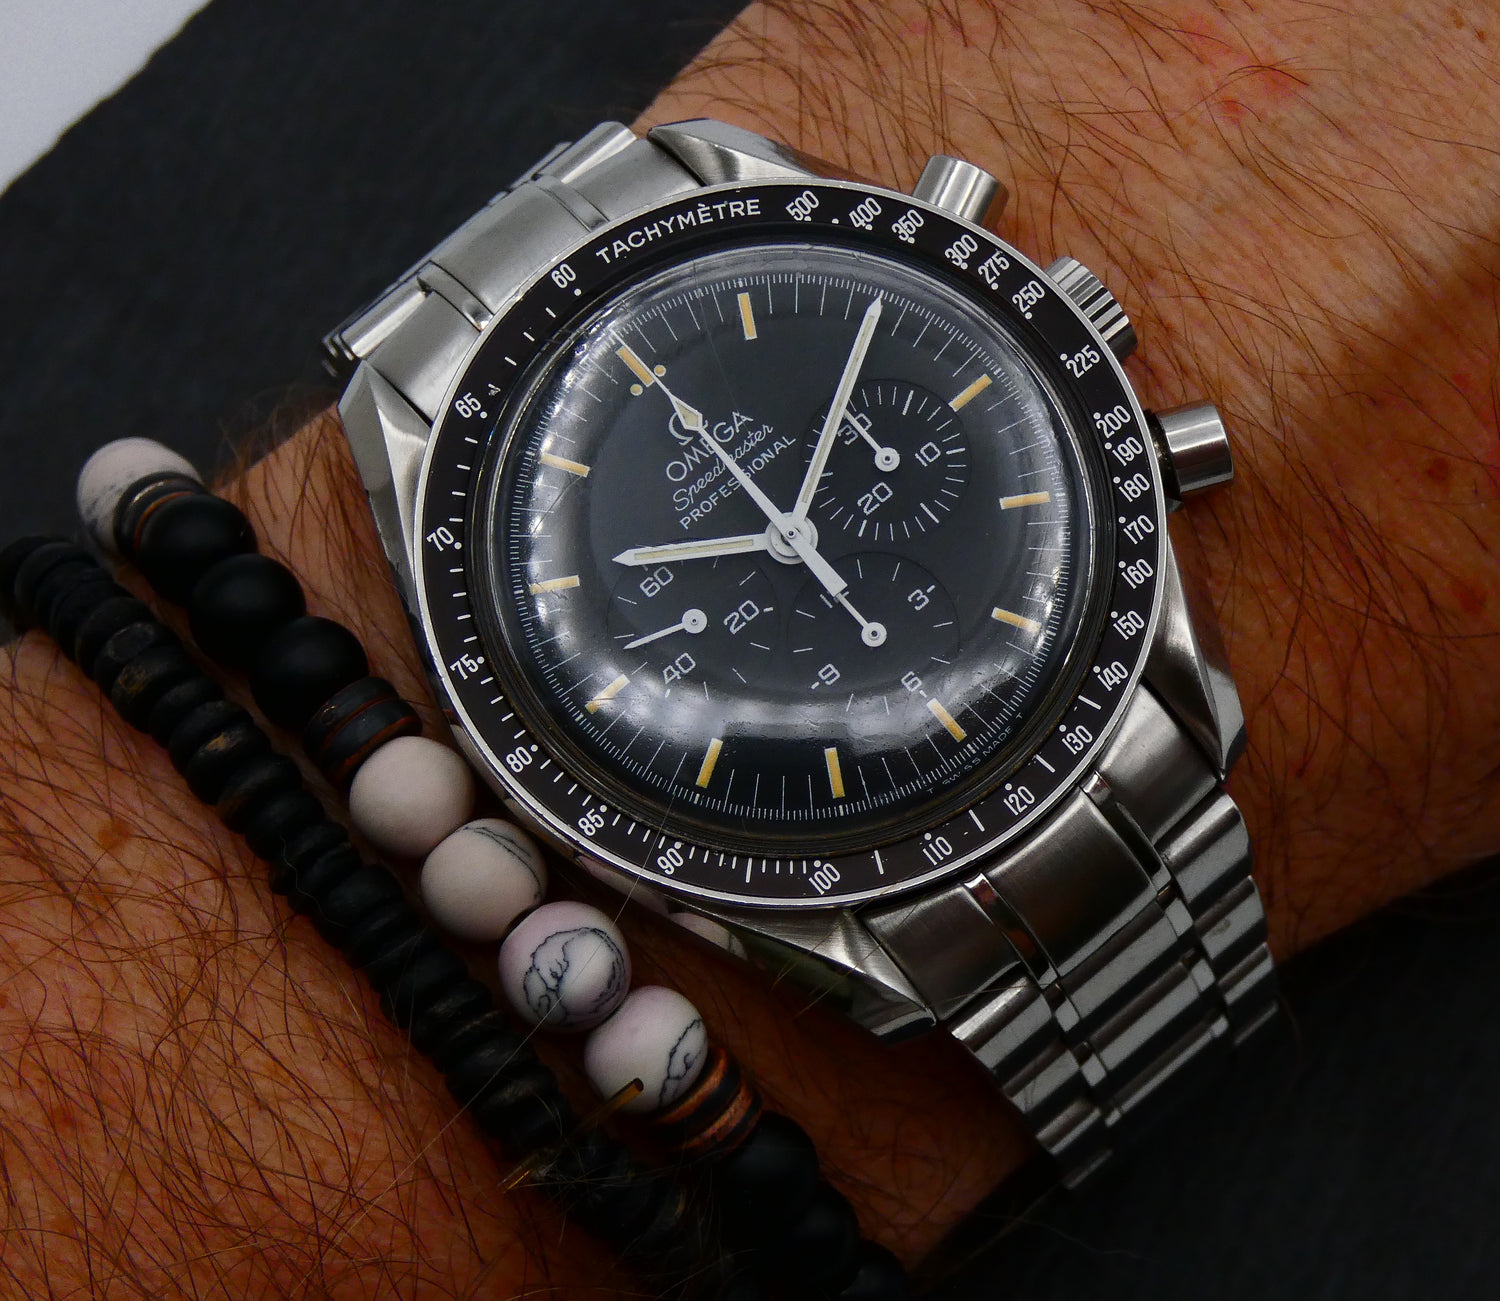 SOLDOUT Omega Speedmaster Professional Moonwatch 145.022